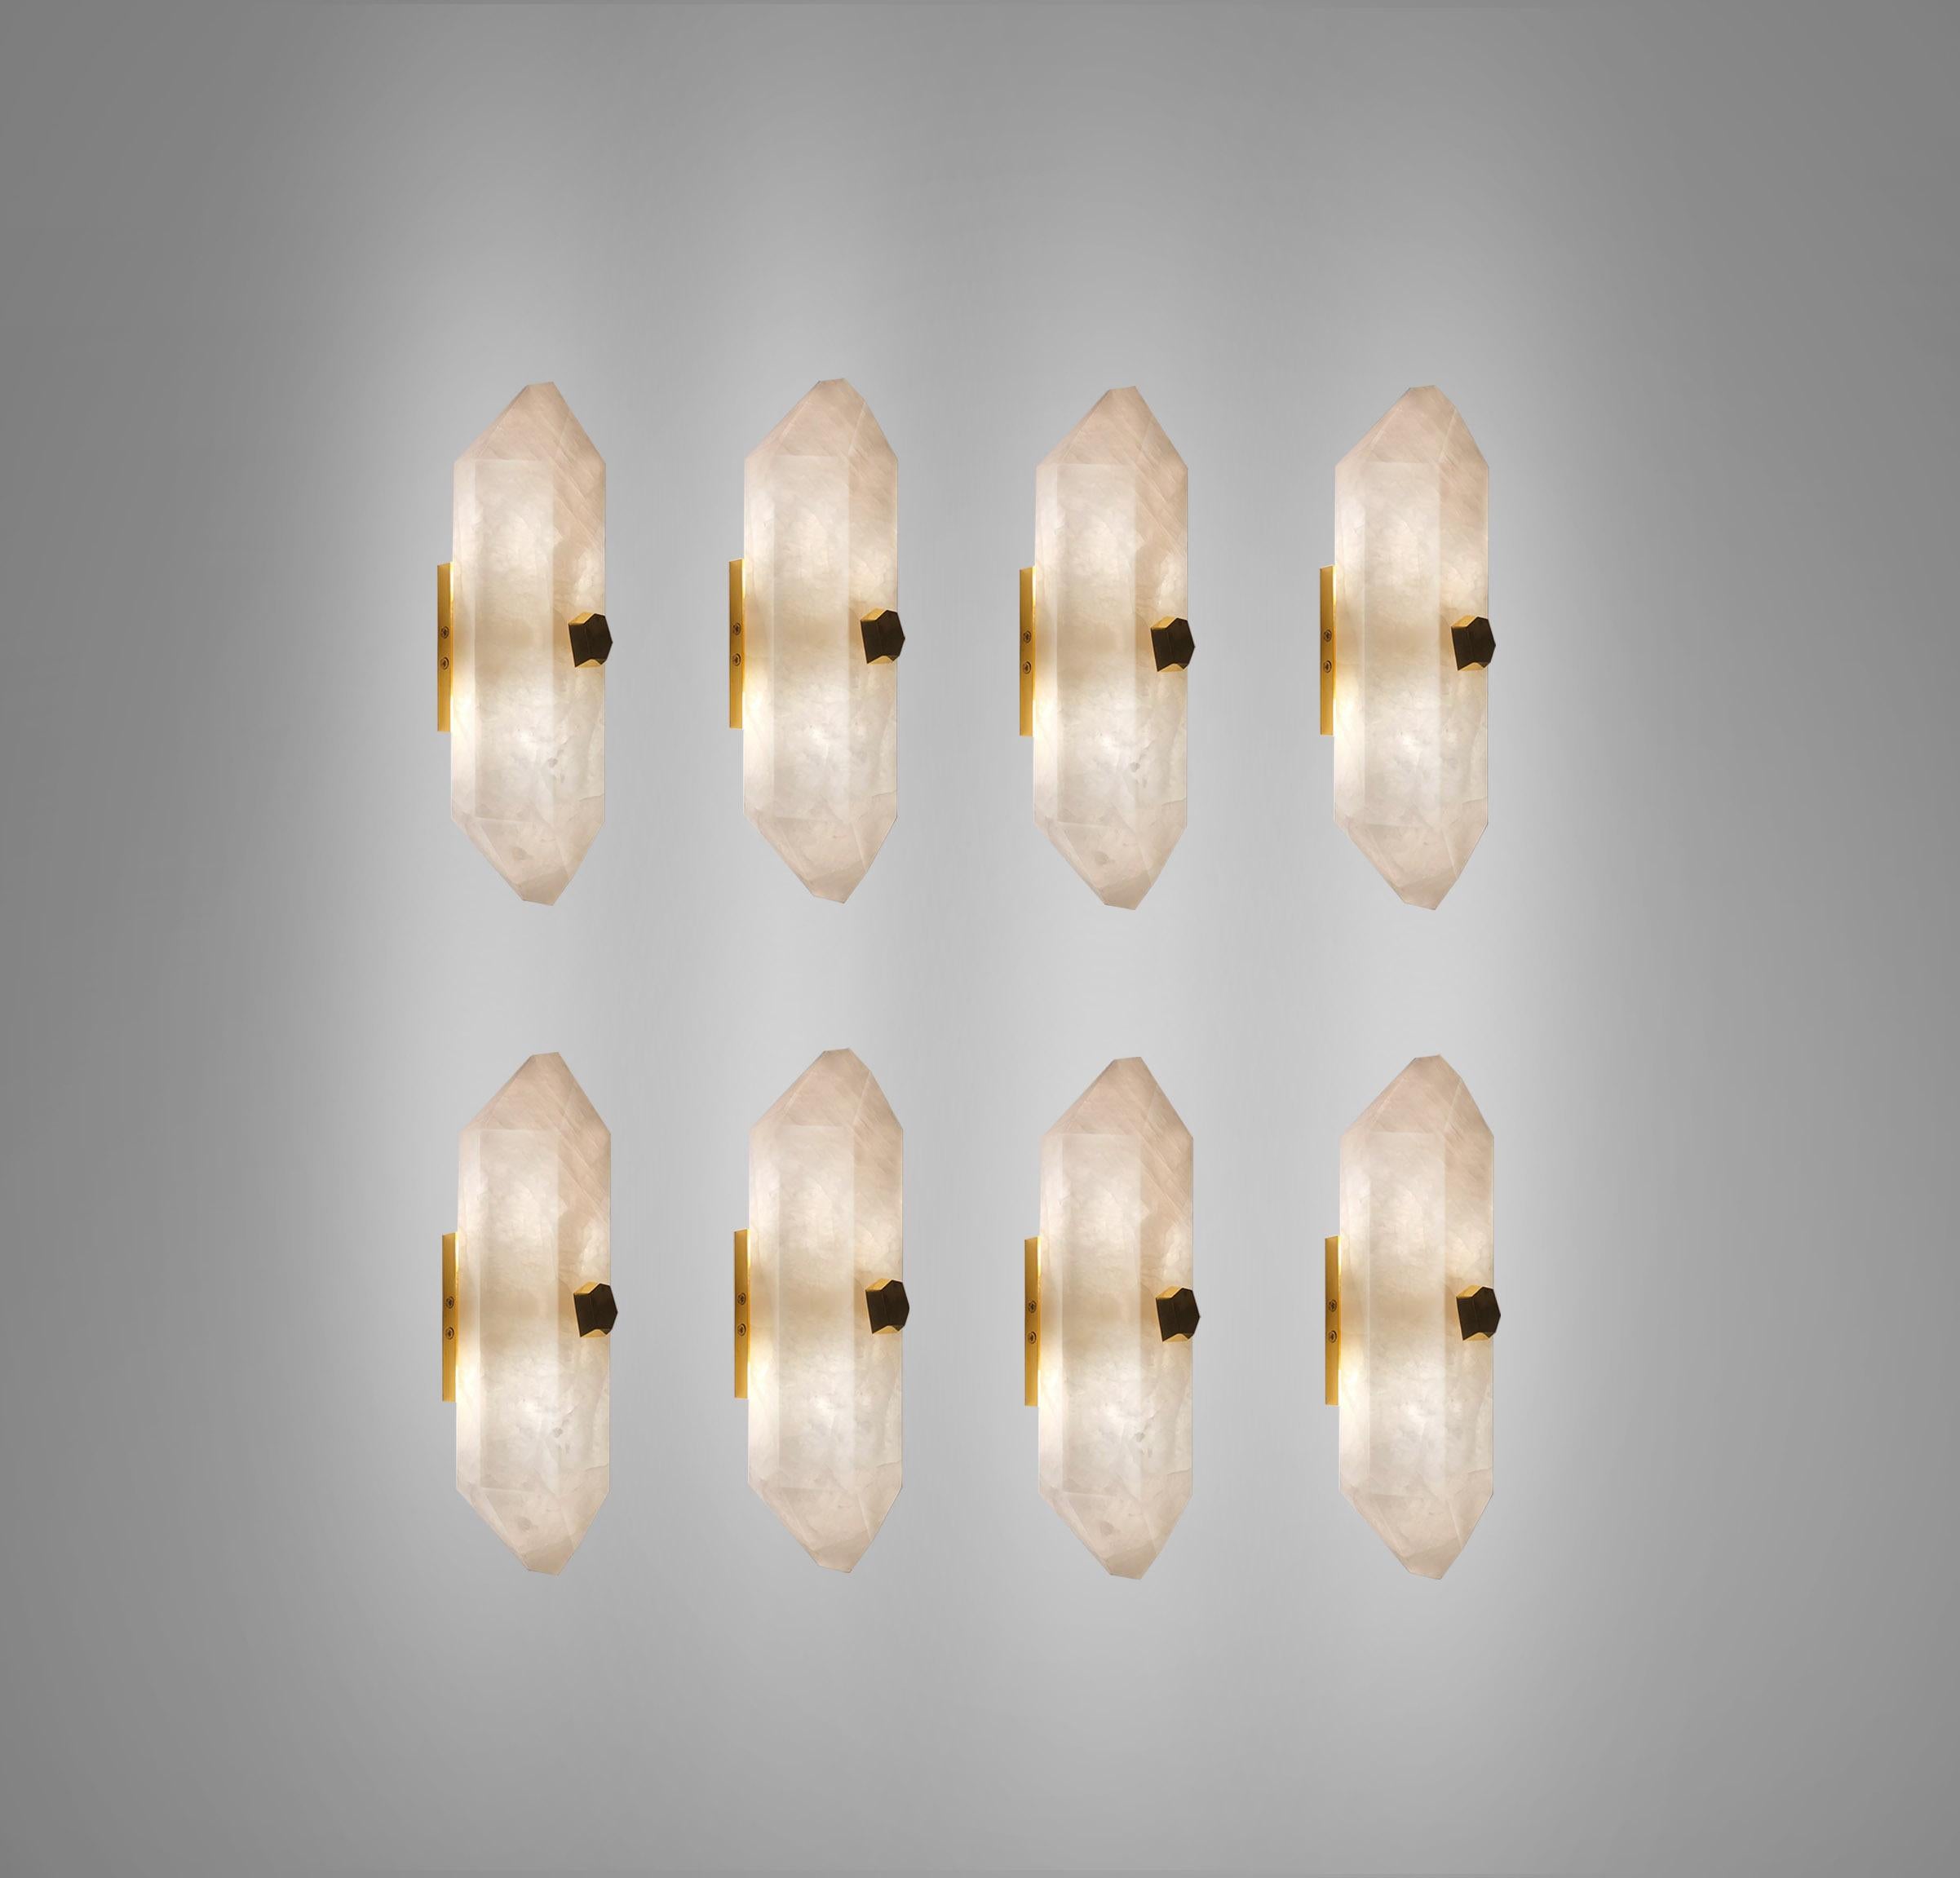 Group of eight finely carved diamond form rock crystal sconces with the polished brass mounts. Each wall sconce installed two sockets, 60 watts max each socket, total 120-watt. Created by Phoenix Gallery NYC.
Custom size, finish, and quantity upon